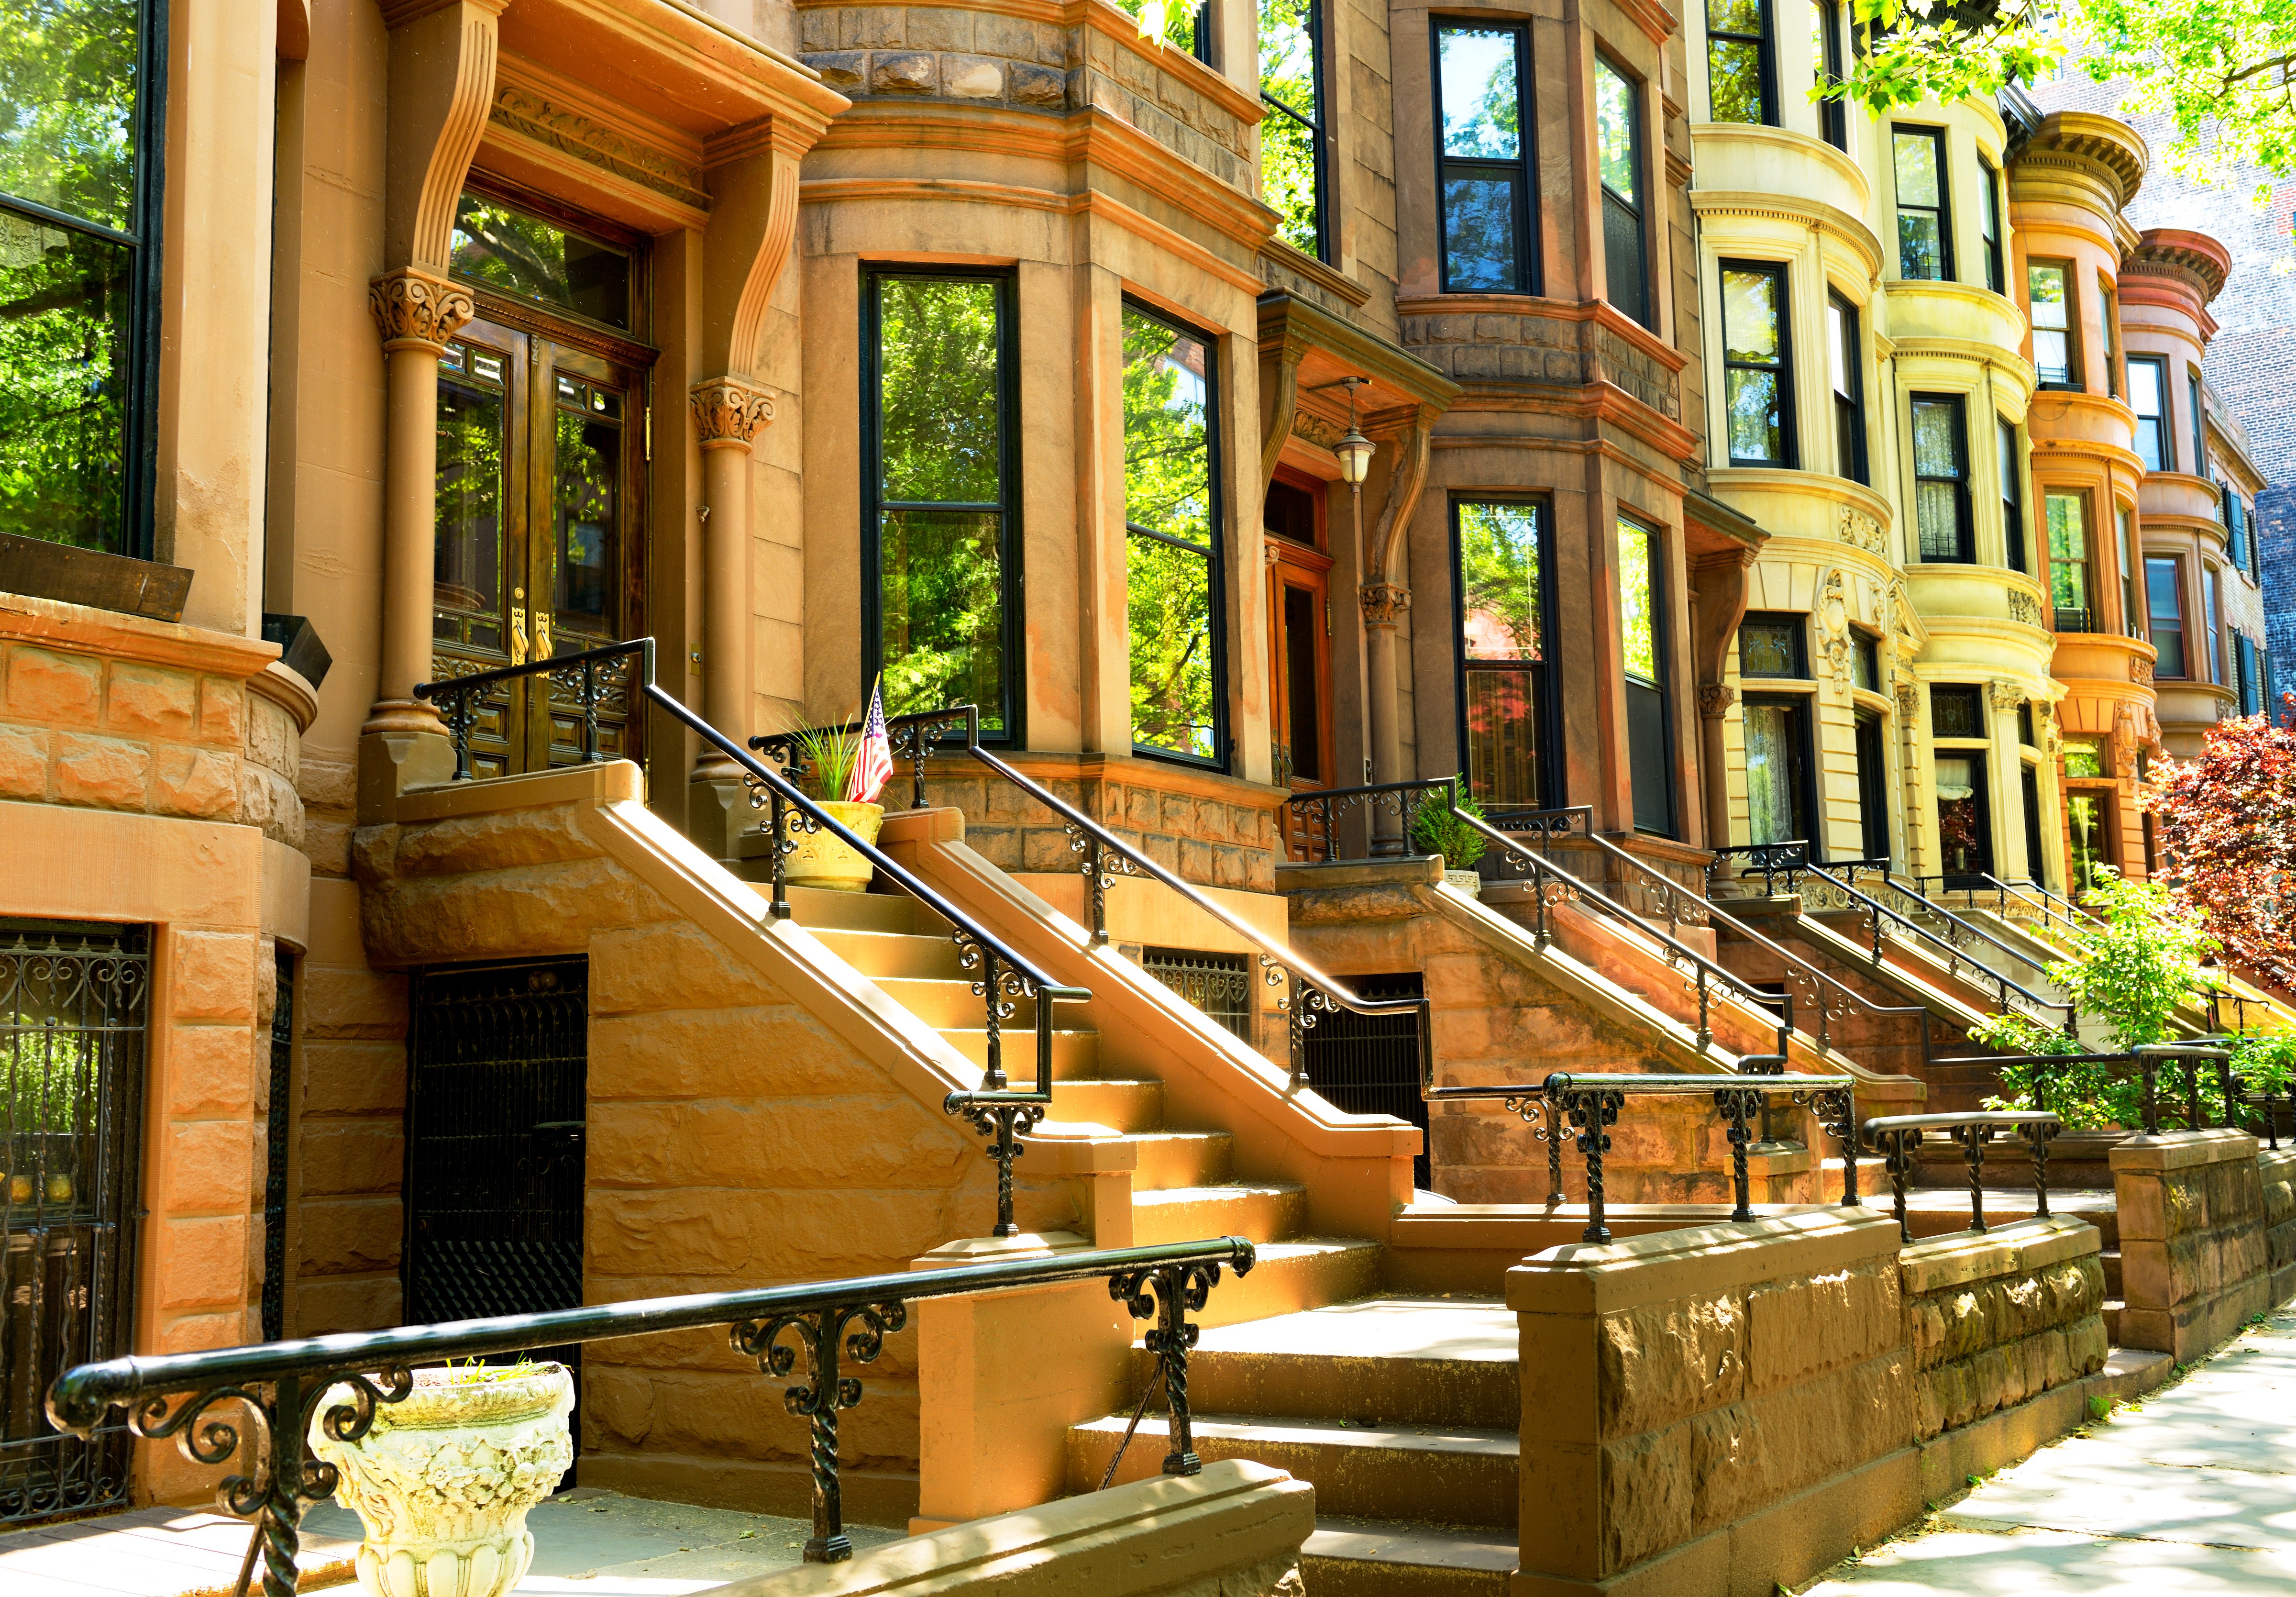 Brownstone in a row, NYC